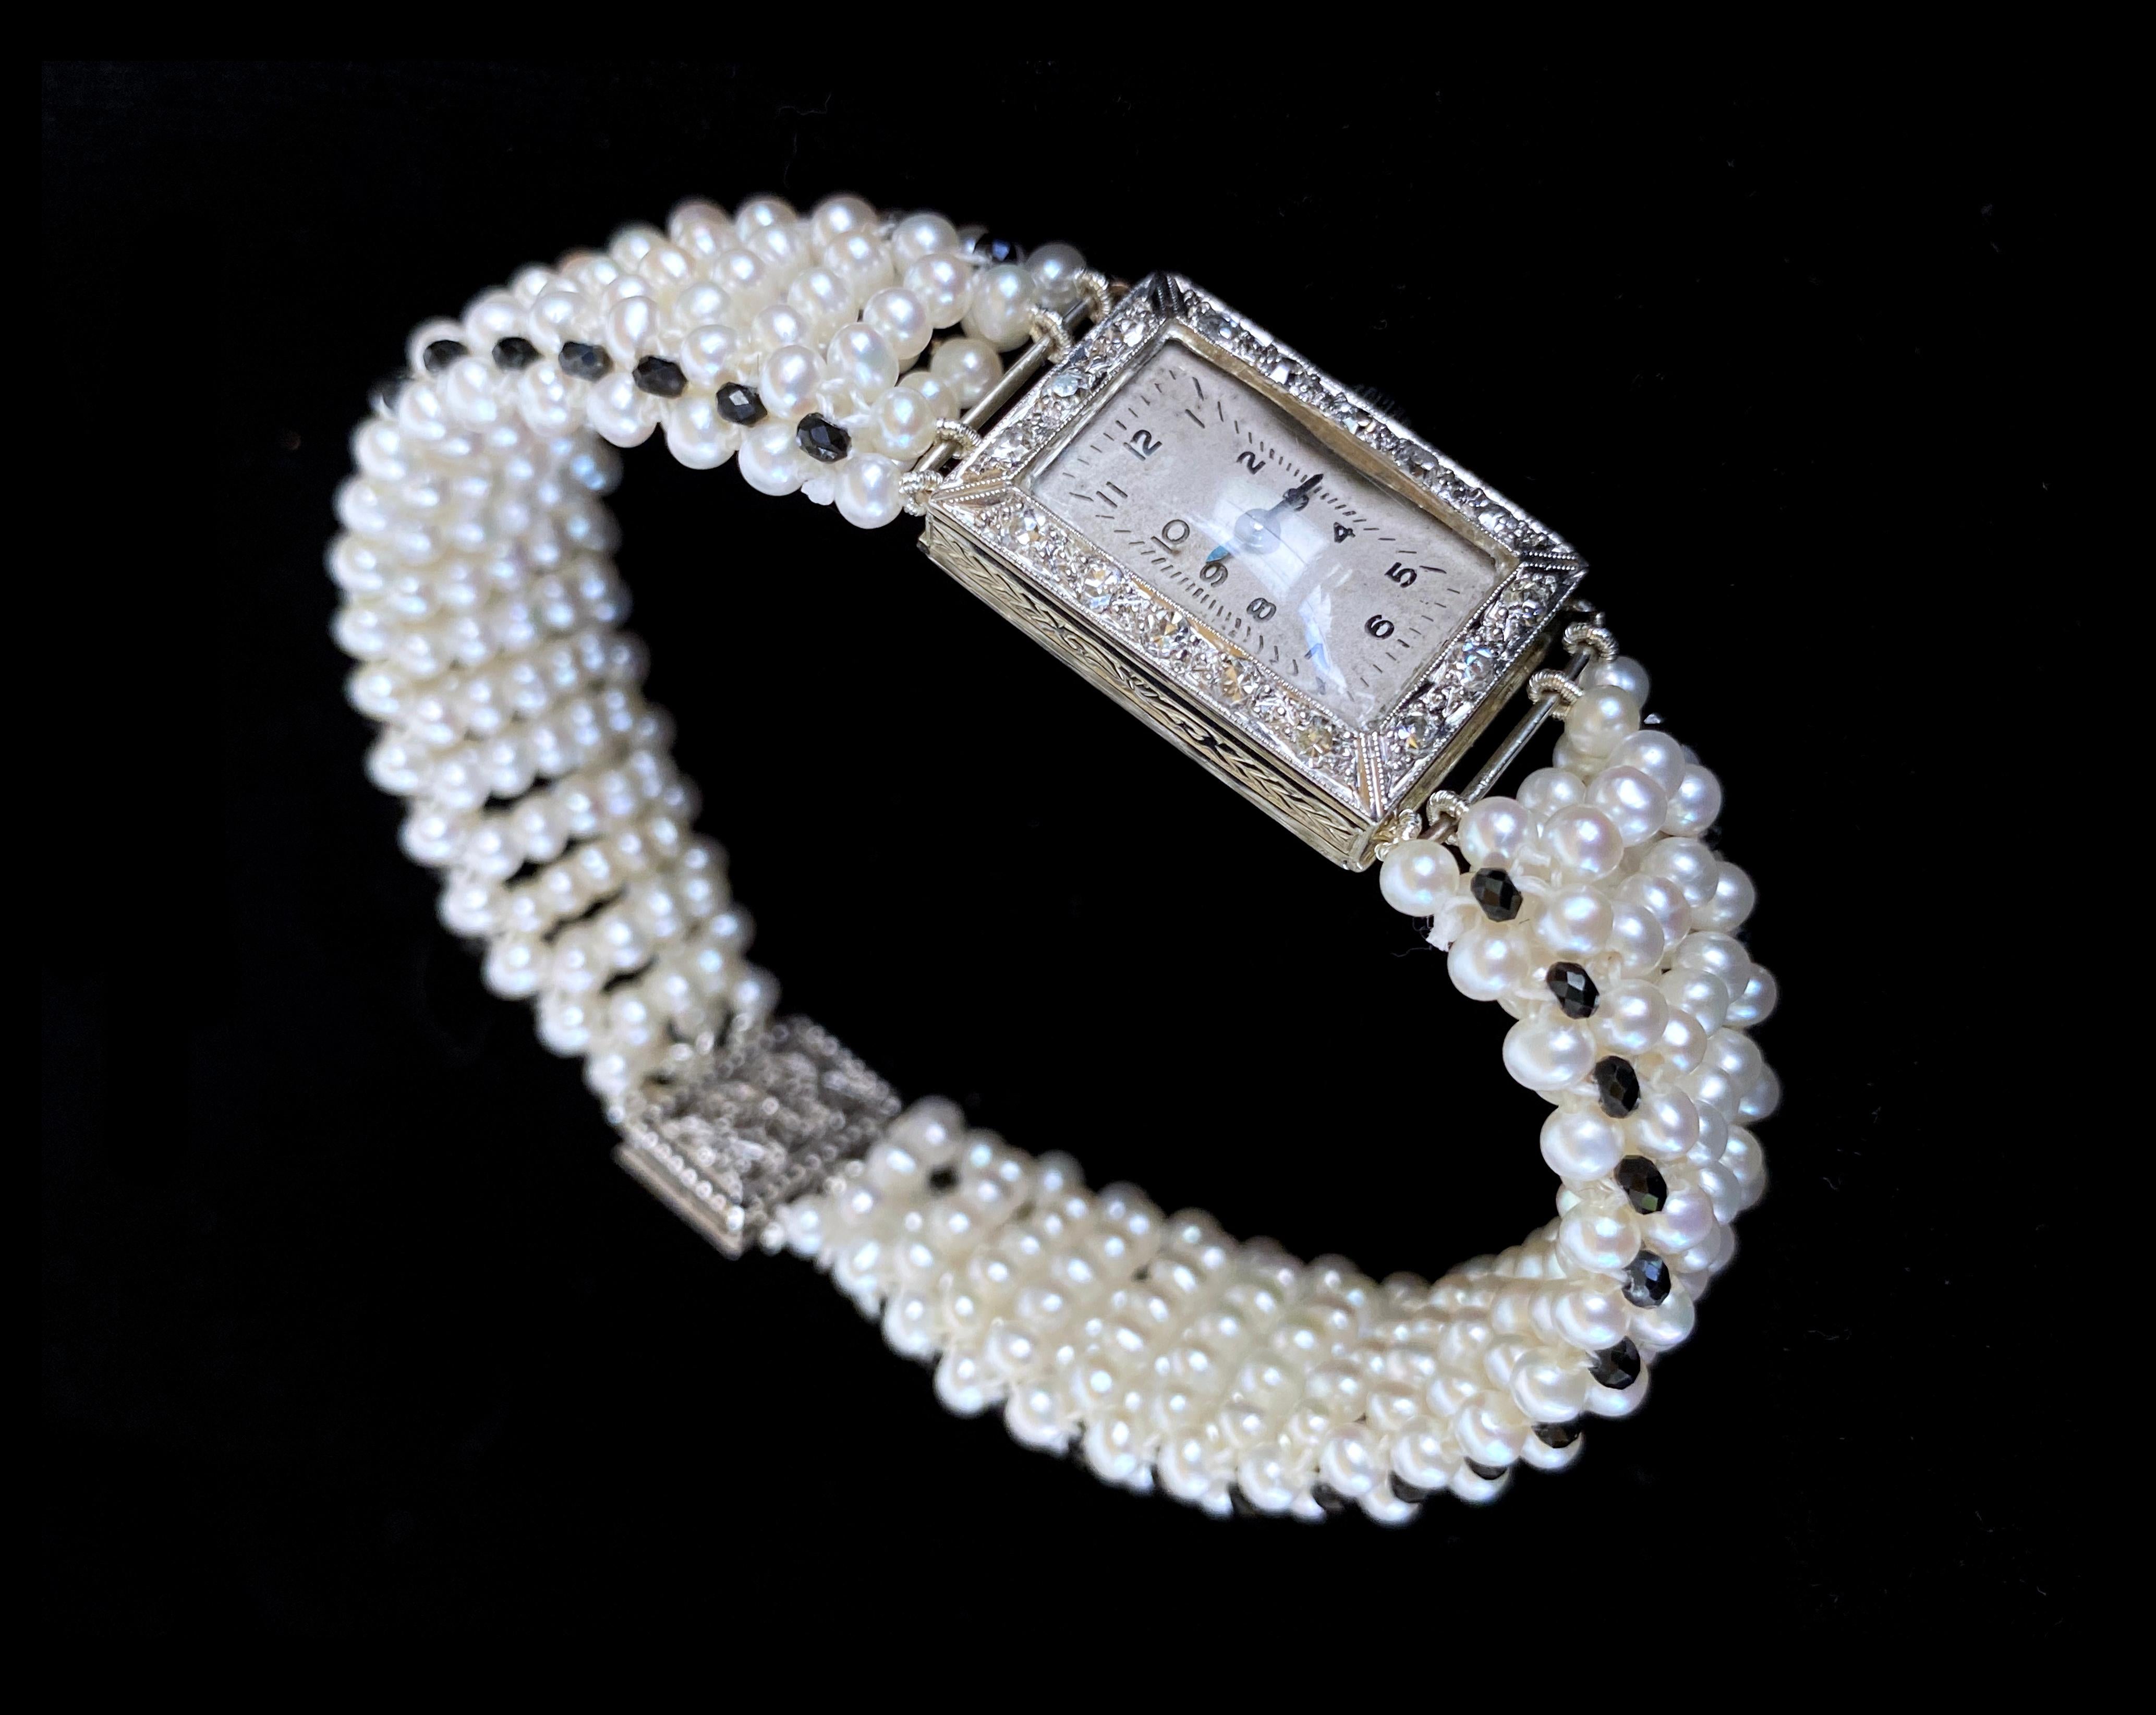 One of a Kind piece by Marina J. This unique bracelet features a vintage 18k White Gold Diamond encrusted working manual Watch - reworked into a gorgeous flat Pearl Band. This piece features beautiful Seed Pearls displaying soft iridescence, all